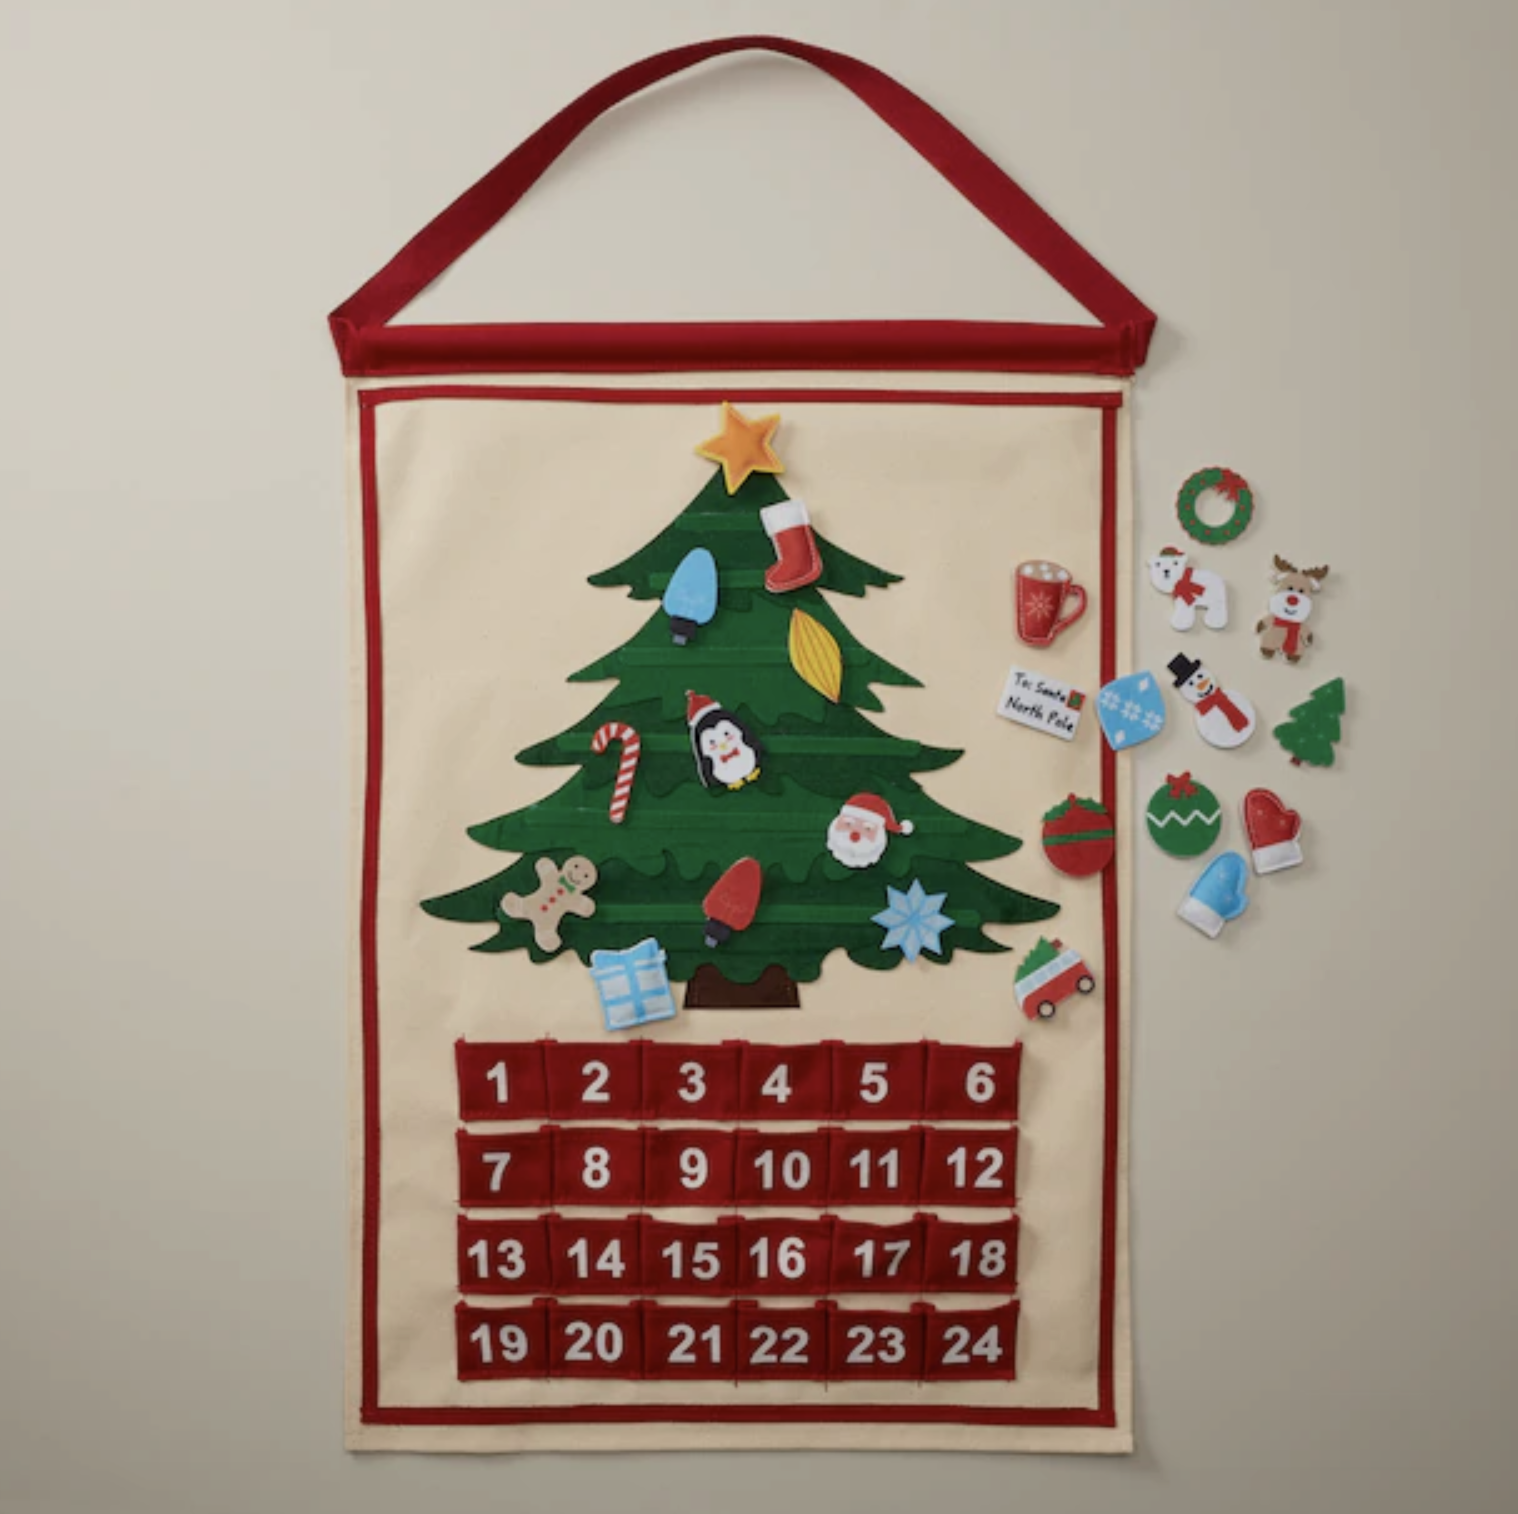 The advent calendar hanging on a wall